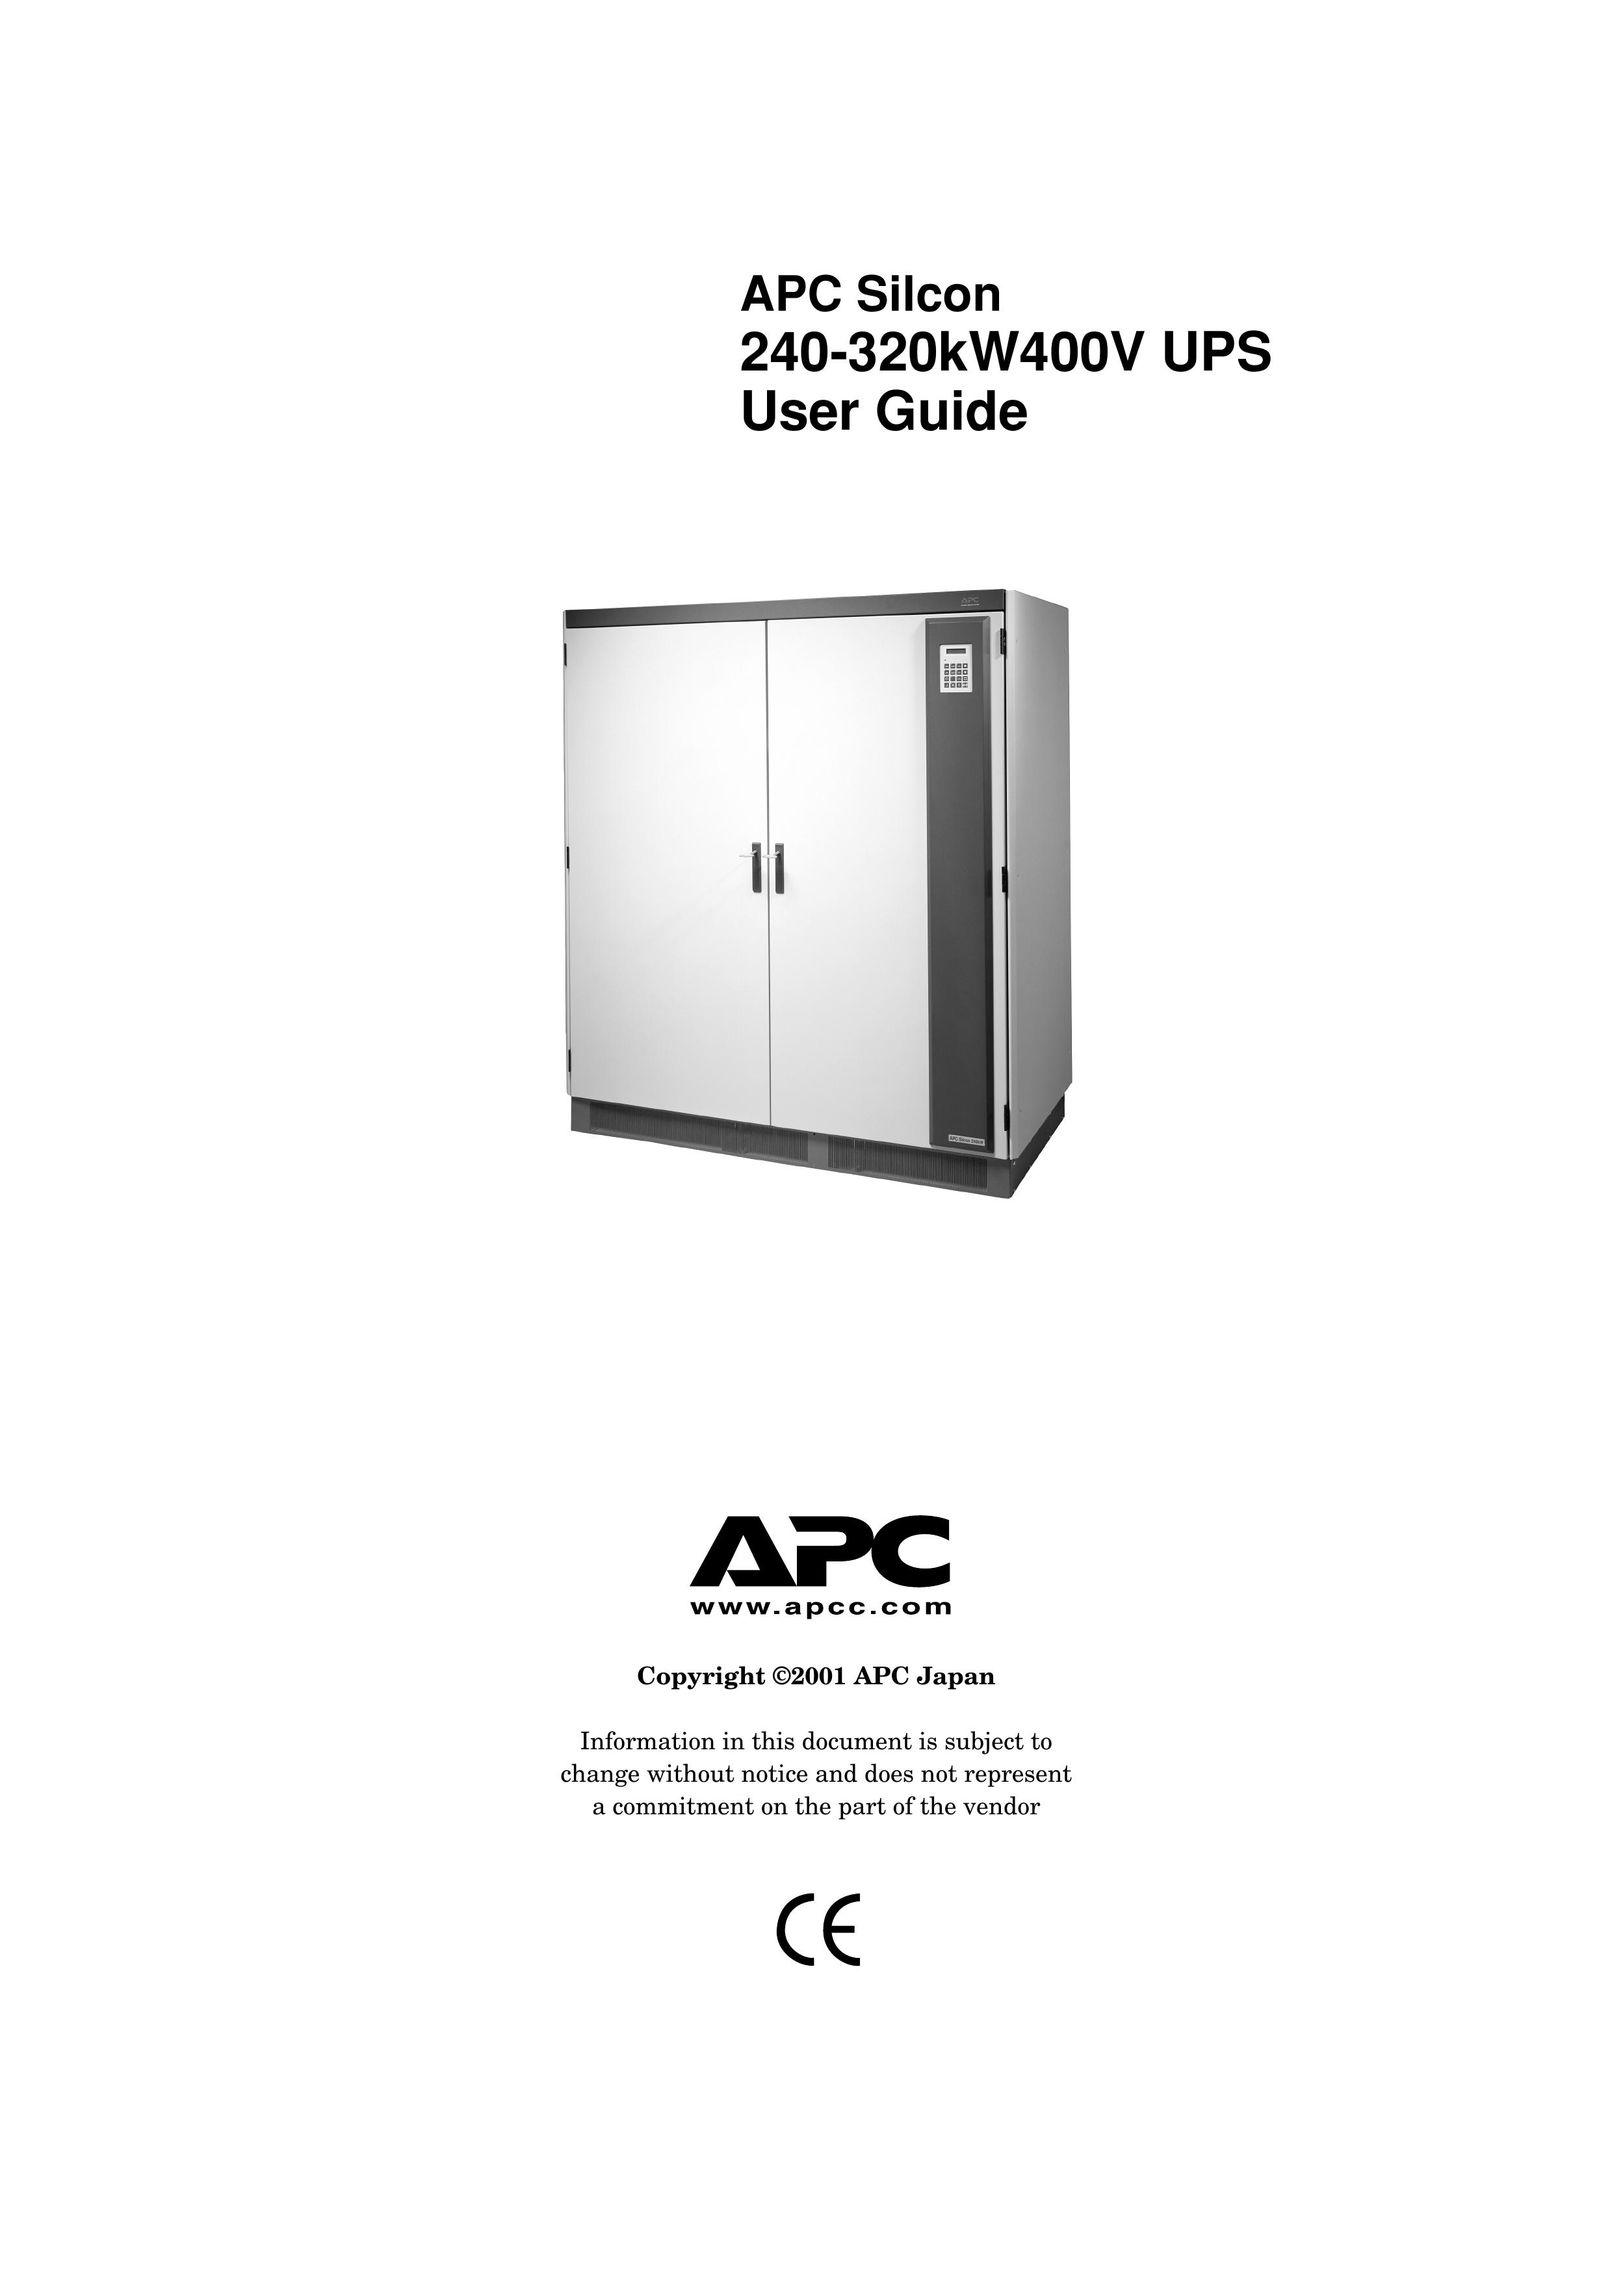 American Power Conversion 240-320kW400V Power Supply User Manual